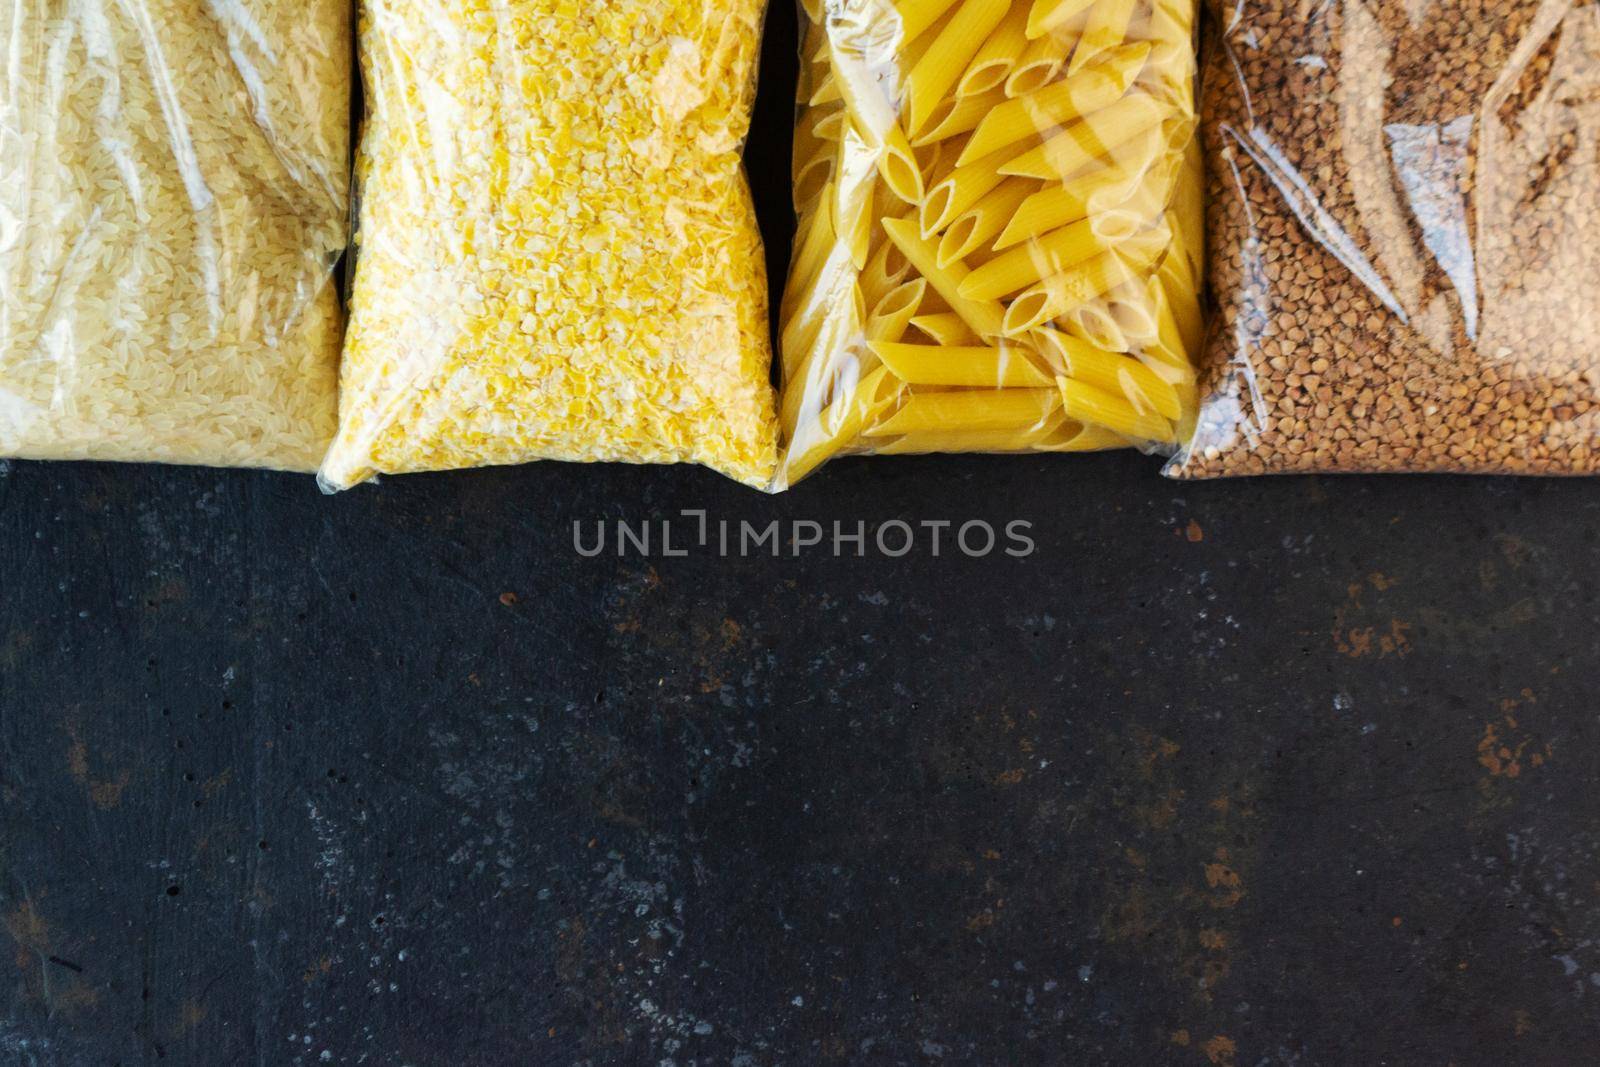 Food supply quarantine food crisis isolated on black concrete background. Rice, pasta, corn flakes, buckwheat. The concept of food delivery, donation, charity. Copyspace.